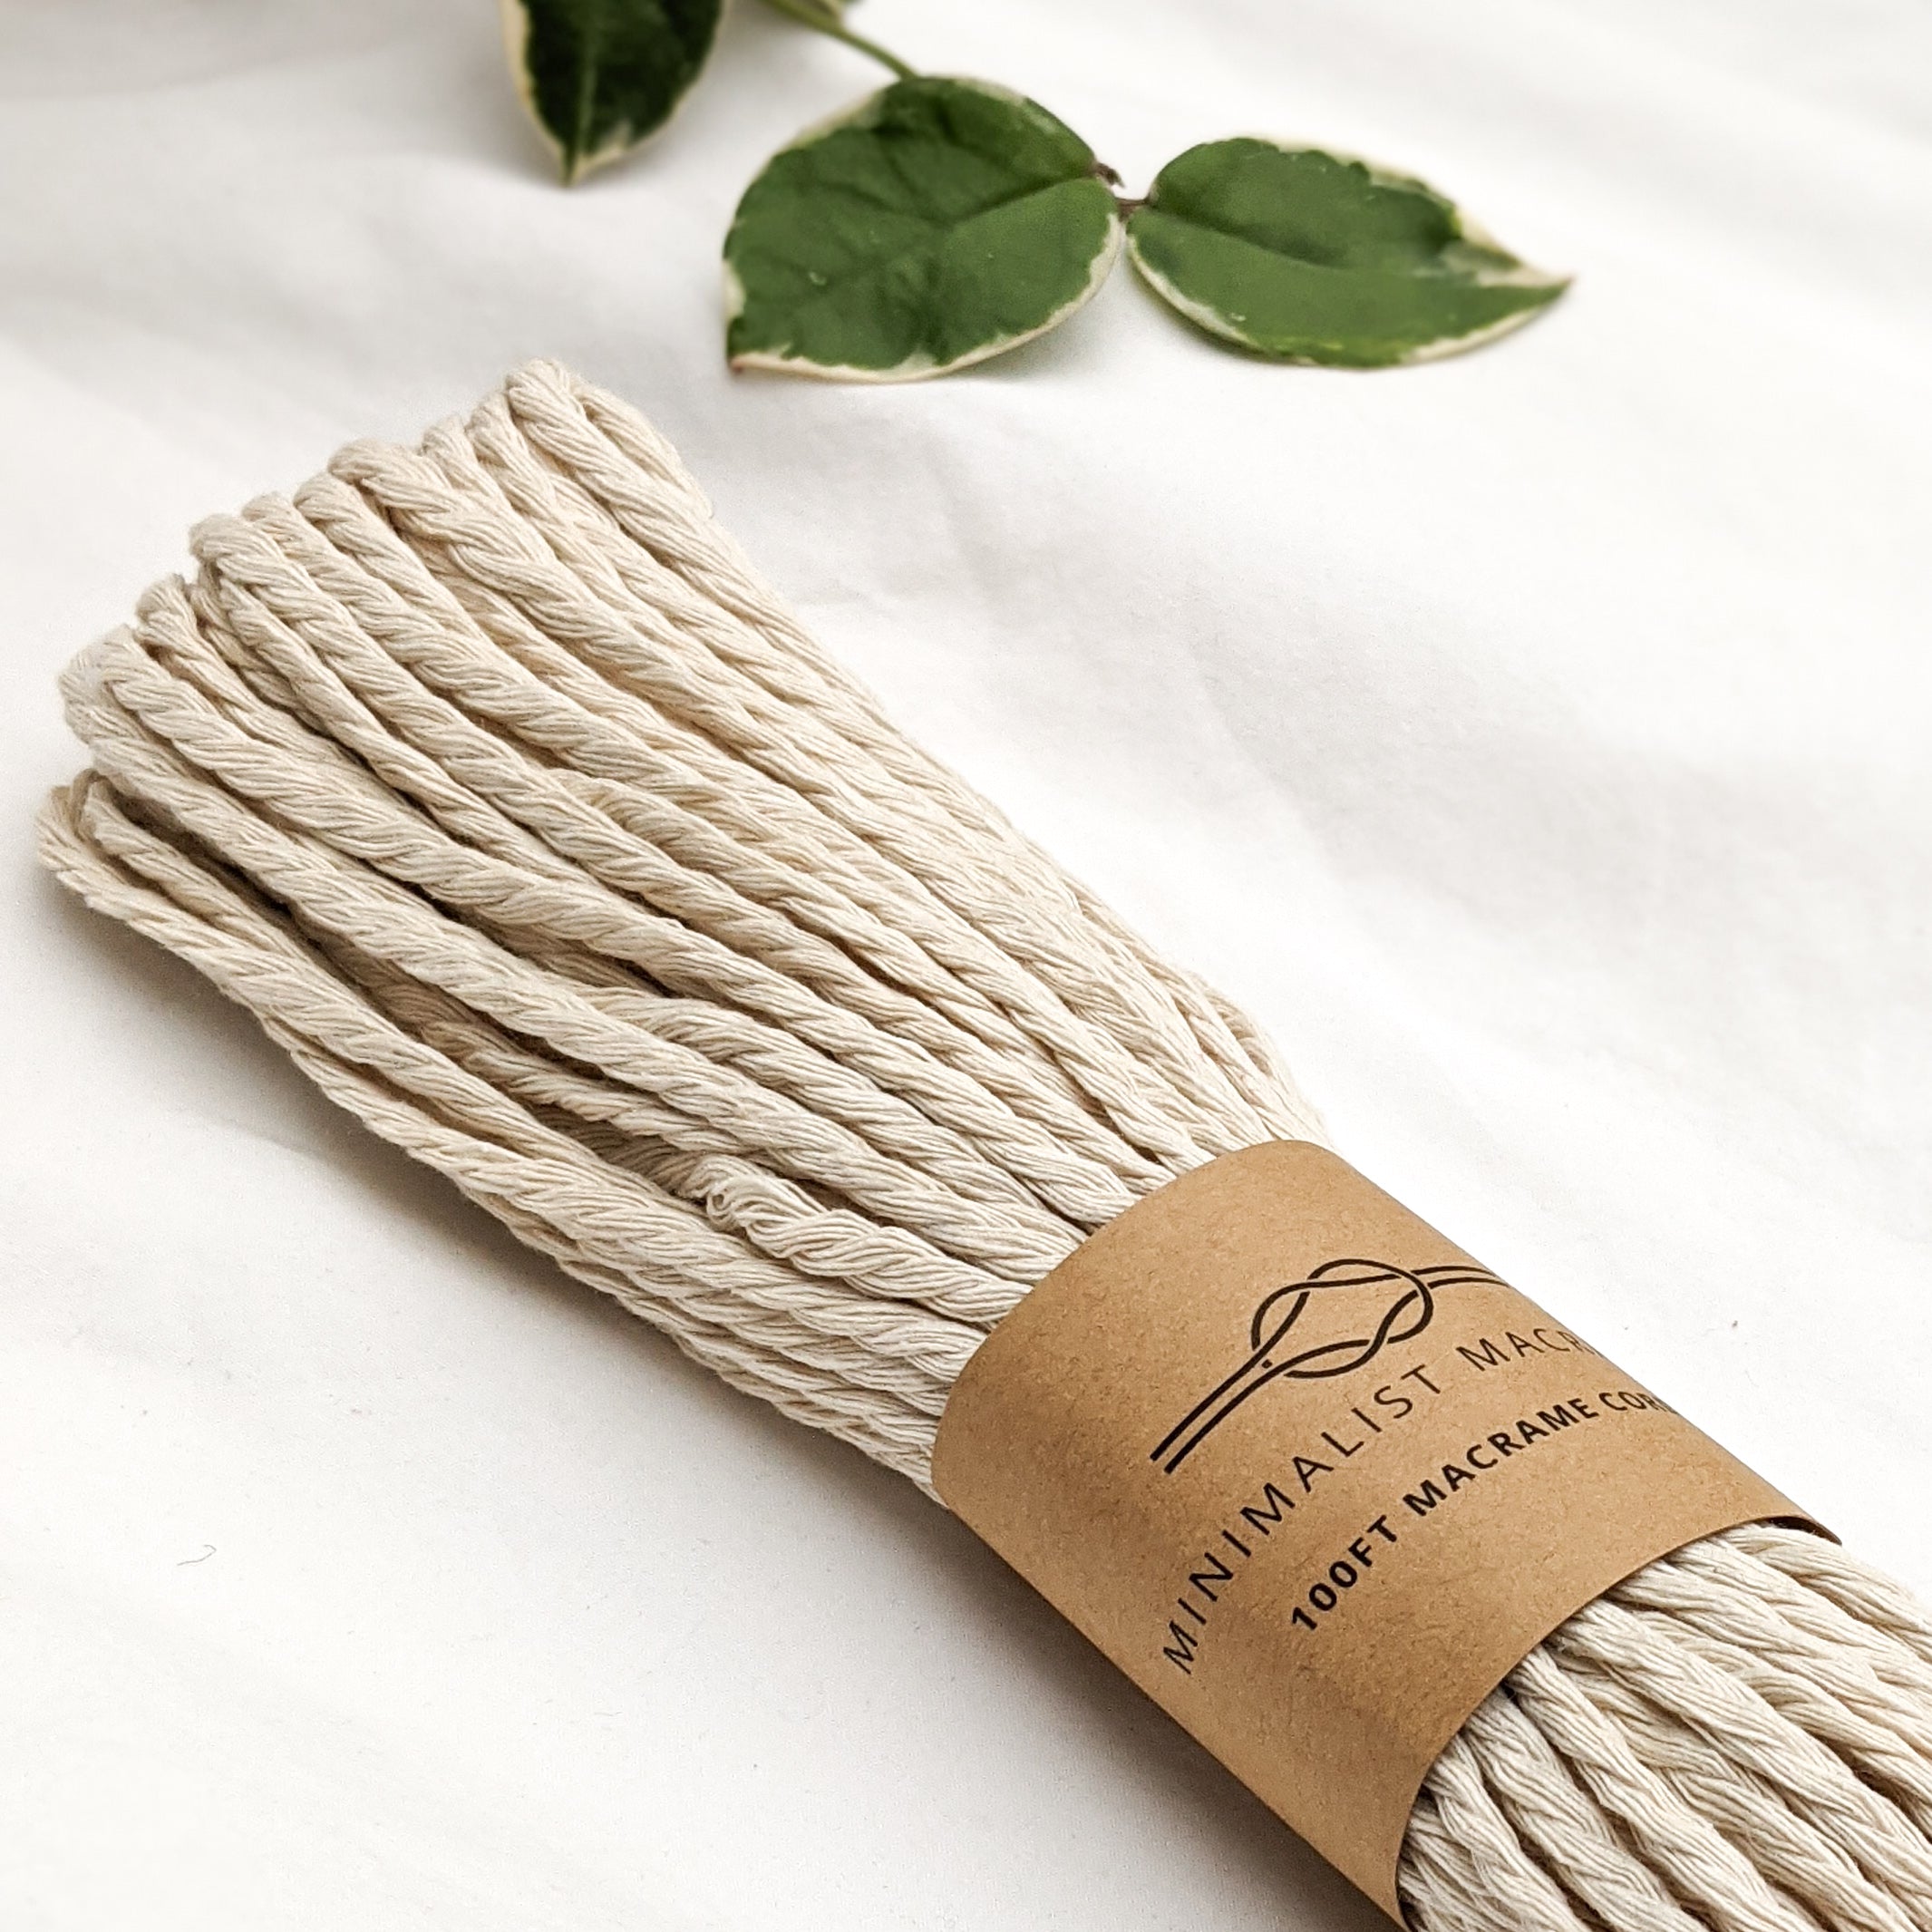 Macrame Cord 3mm / .11. Approx. 1500 M/ 4921 Ft Twisted Cord 100% Cotton  Rope Cotton Cord for Macrame Projects 